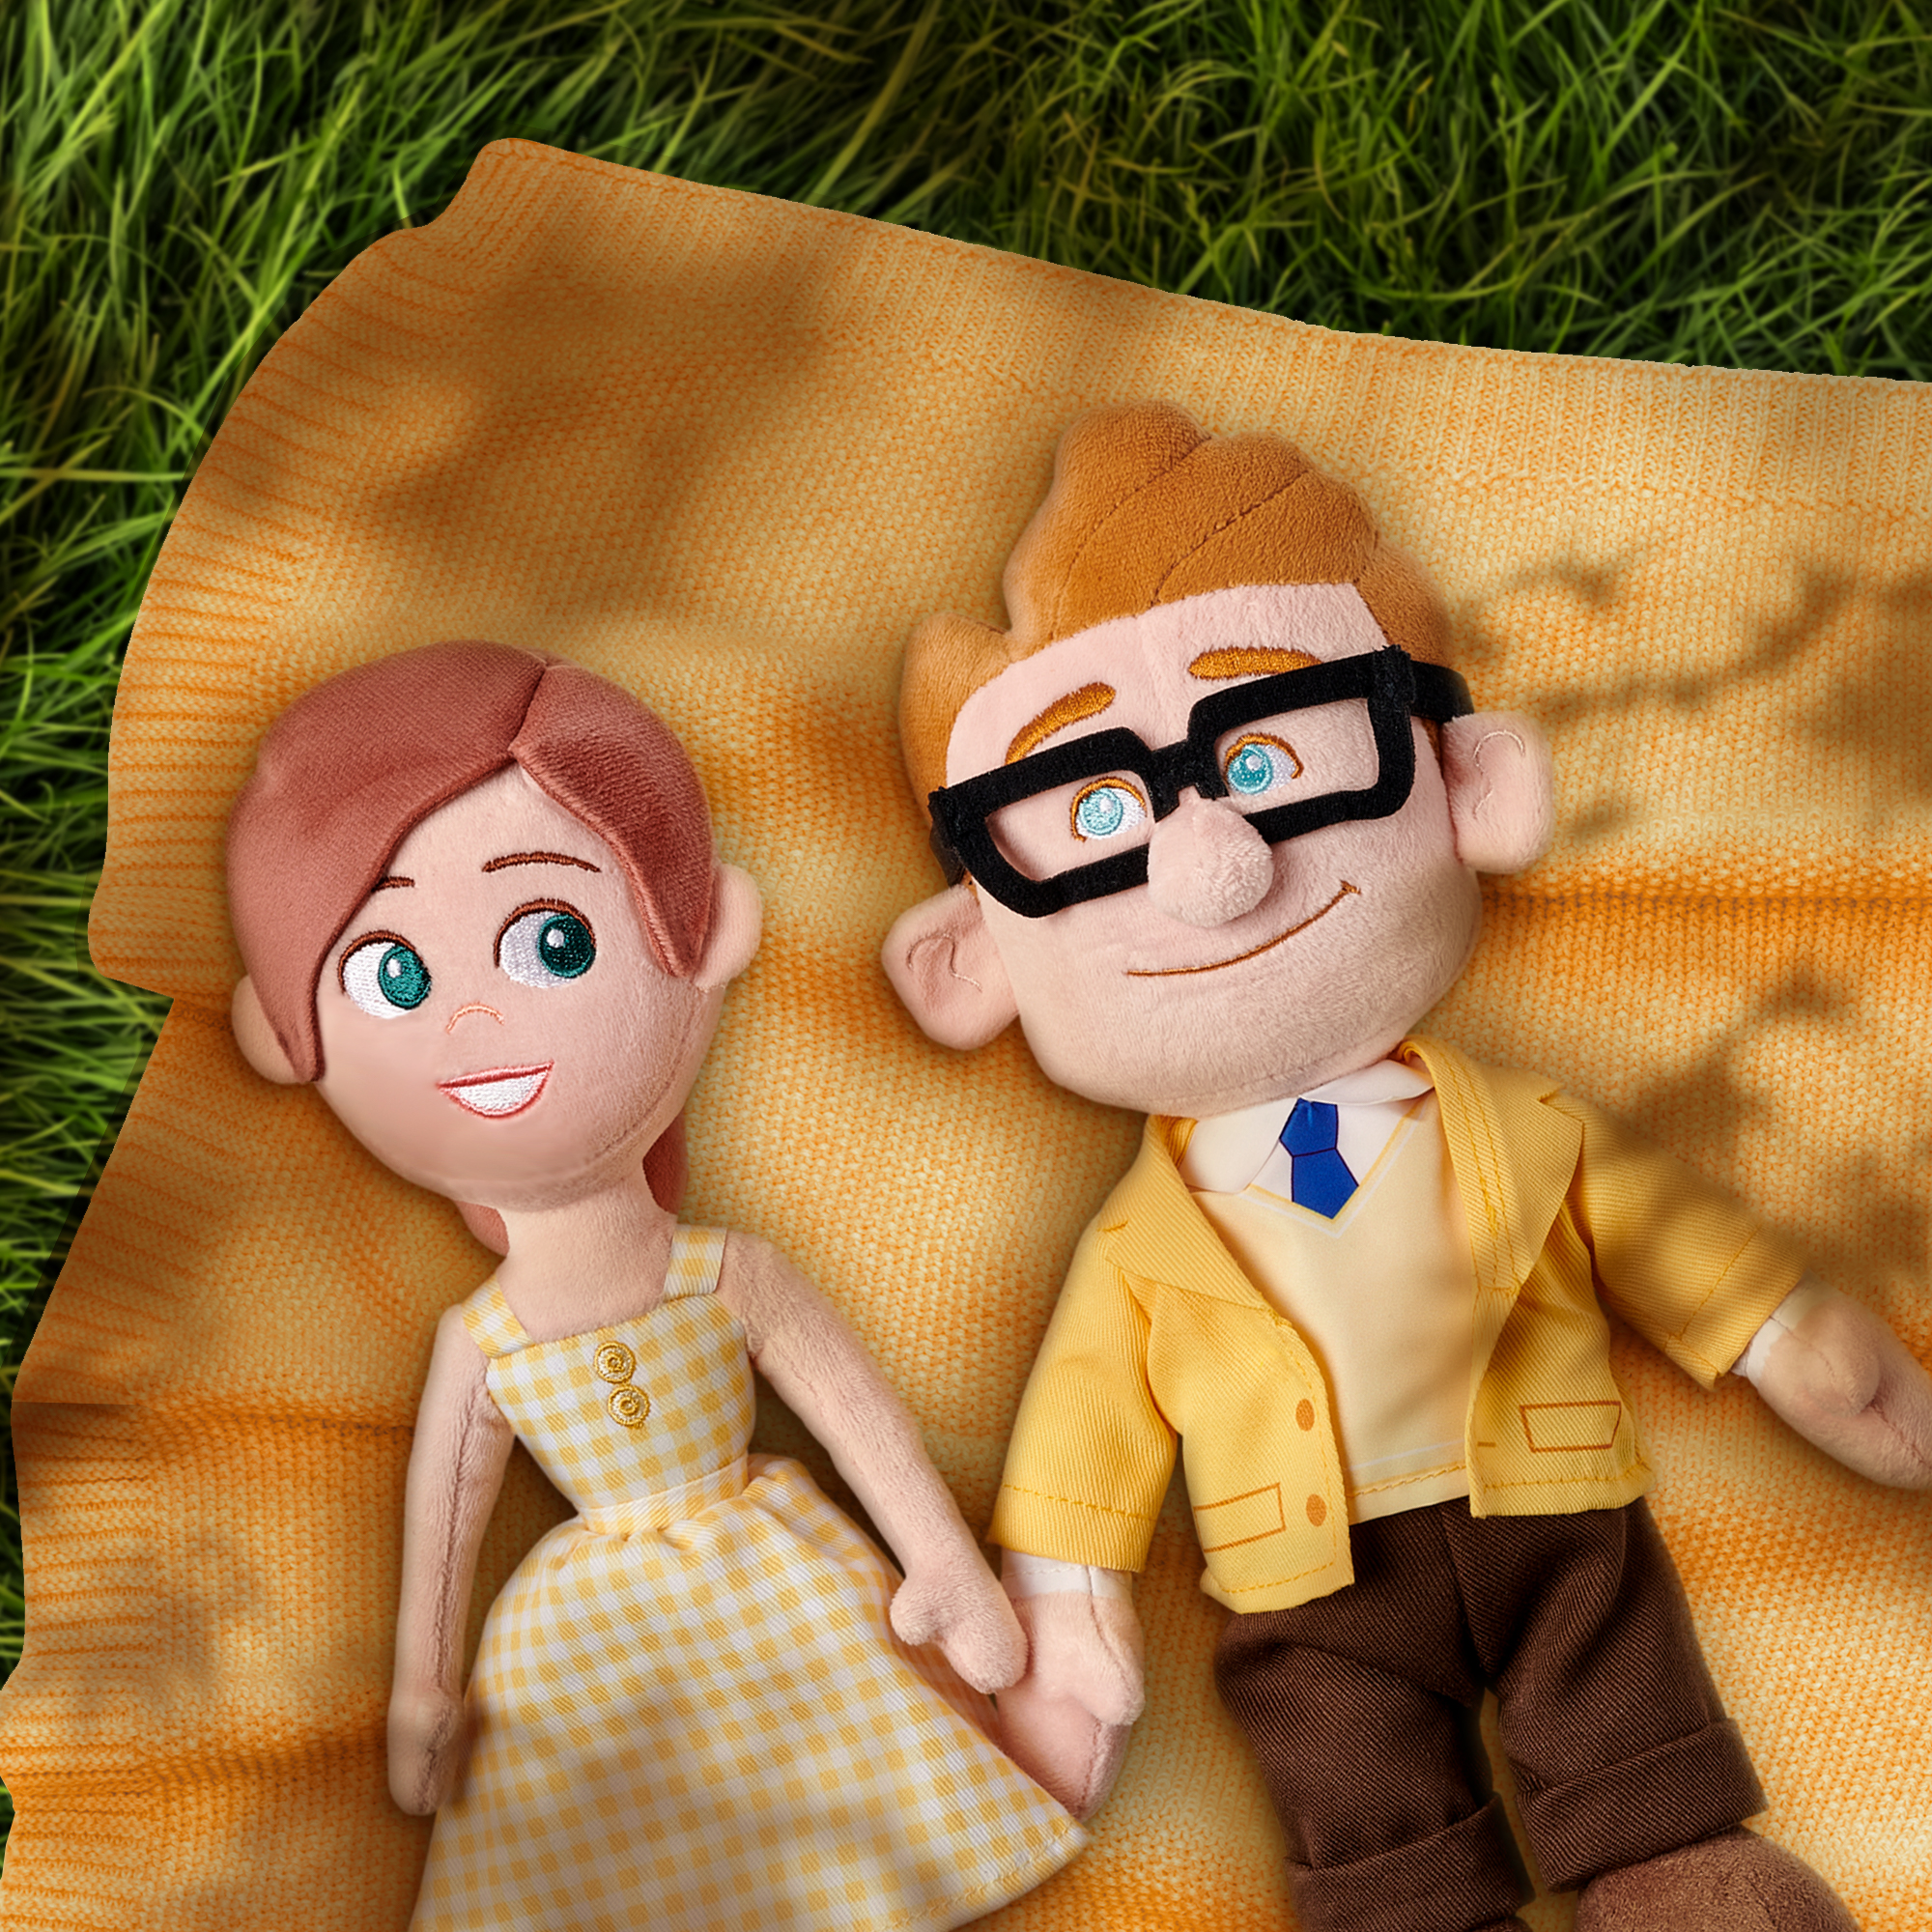 Photo of Carl & Ellie Plush laying on a blanket